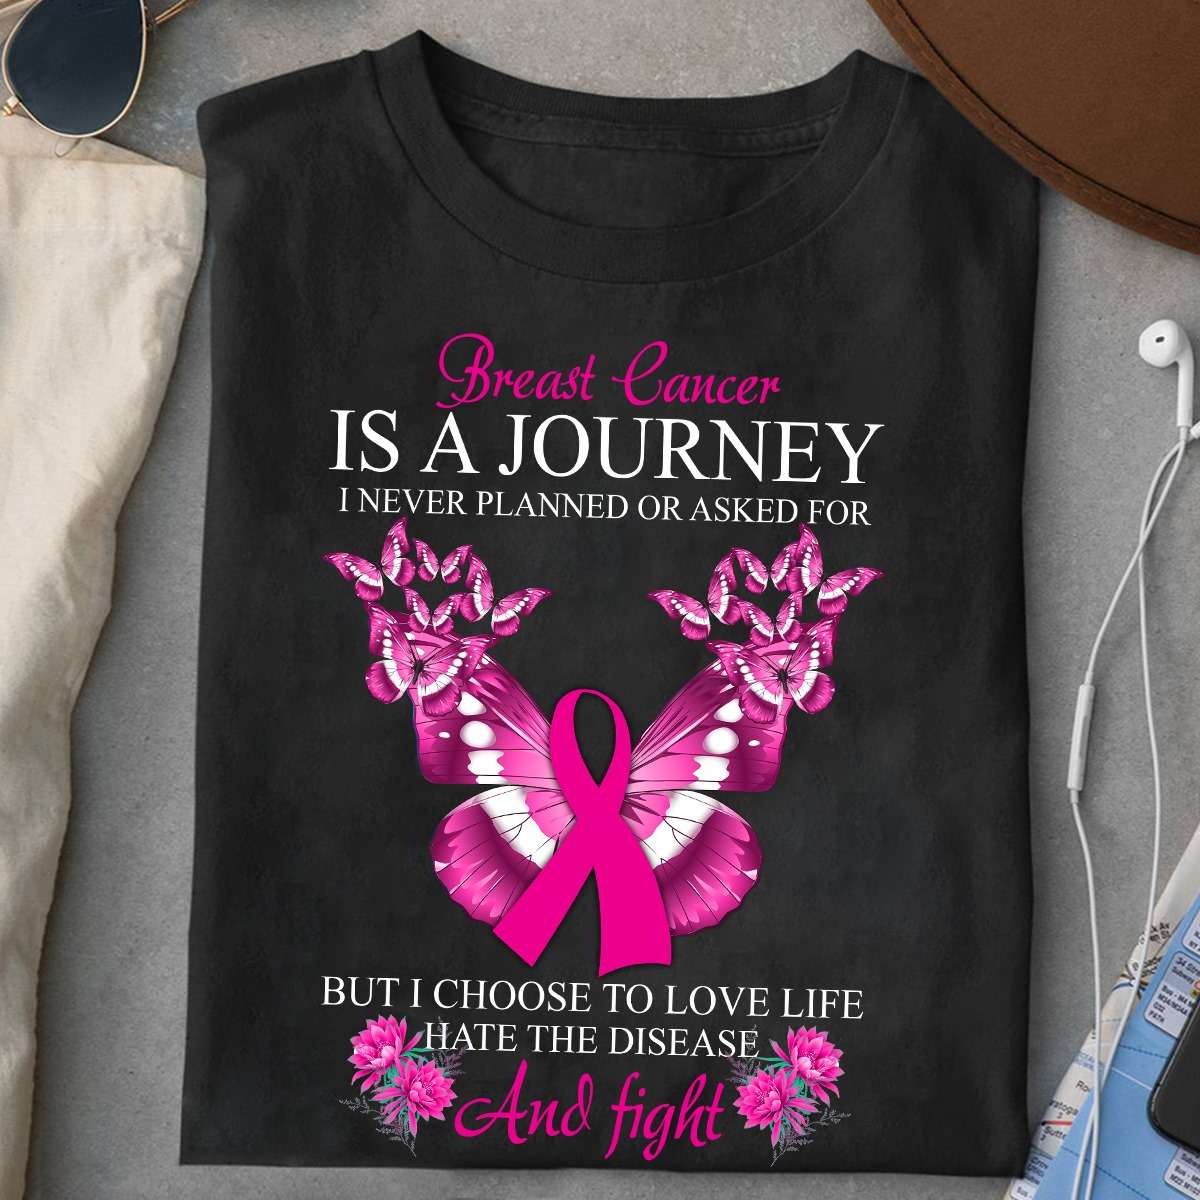 Breast Cancer Butterfly - Breast Cancer is a journey i never planned or asked for but i choose to love life hate the disease and fight